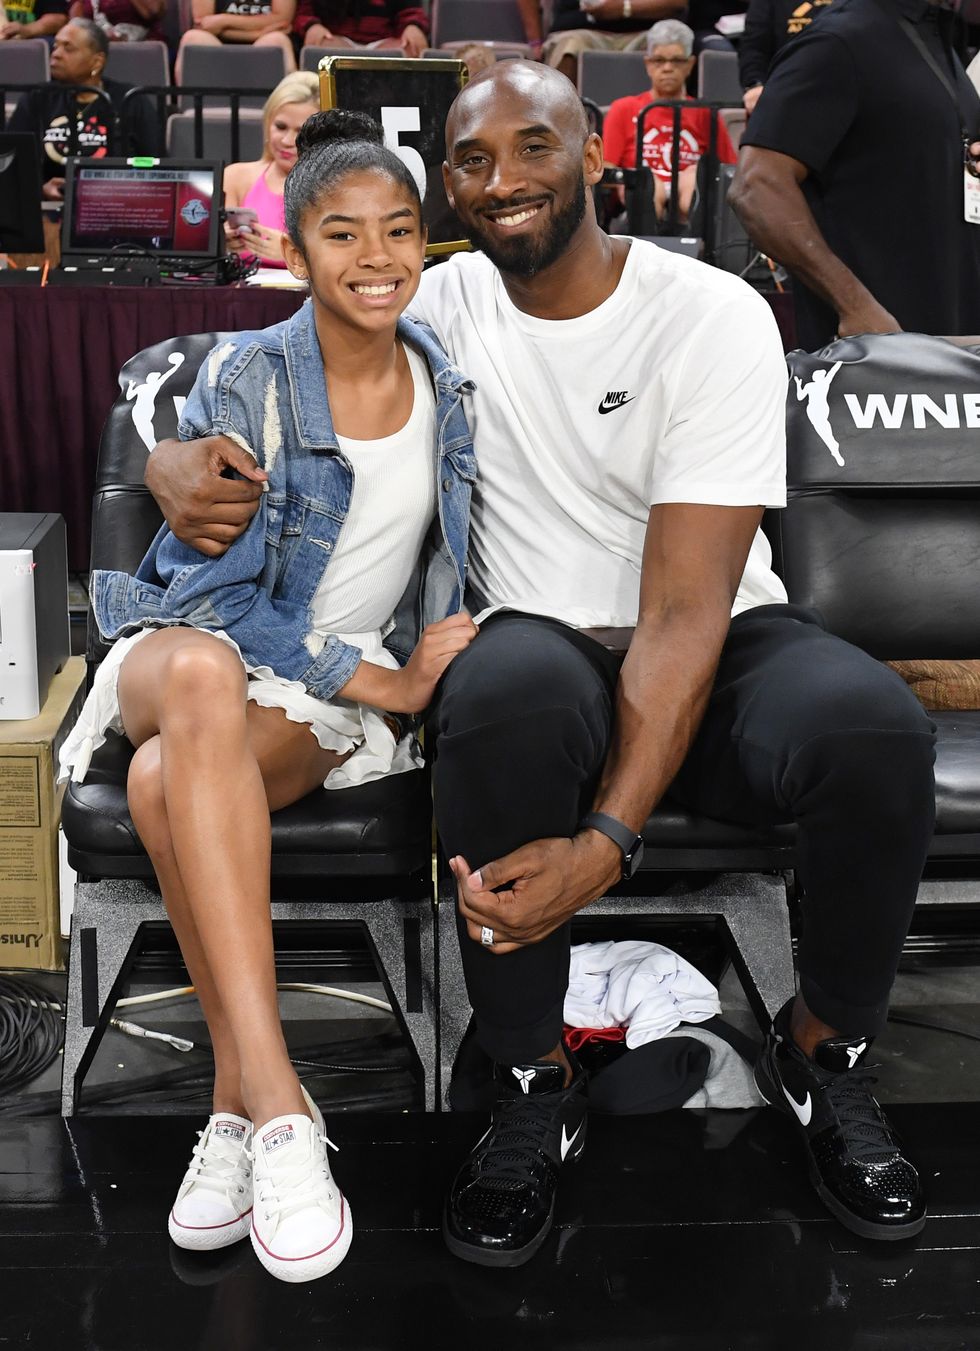 las vegas, nevada   july 27  gianna bryant and her father, former nba player kobe bryant, attend the wnba all star game 2019 at the mandalay bay events center on july 27, 2019 in las vegas, nevada note to user user expressly acknowledges and agrees that, by downloading and or using this photograph, user is consenting to the terms and conditions of the getty images license agreement  photo by ethan millergetty images